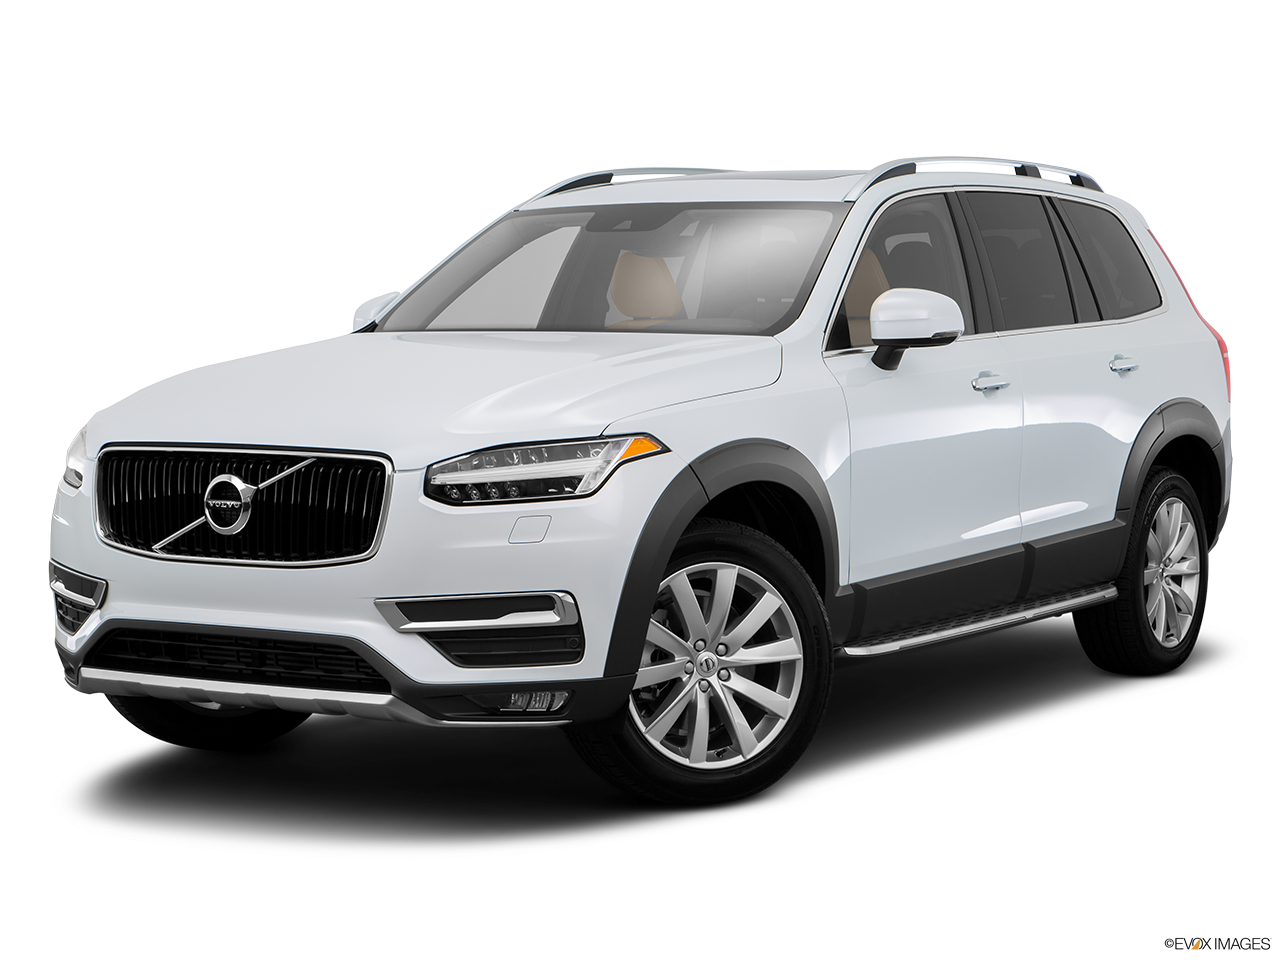 Volvo Xc90 PNG File